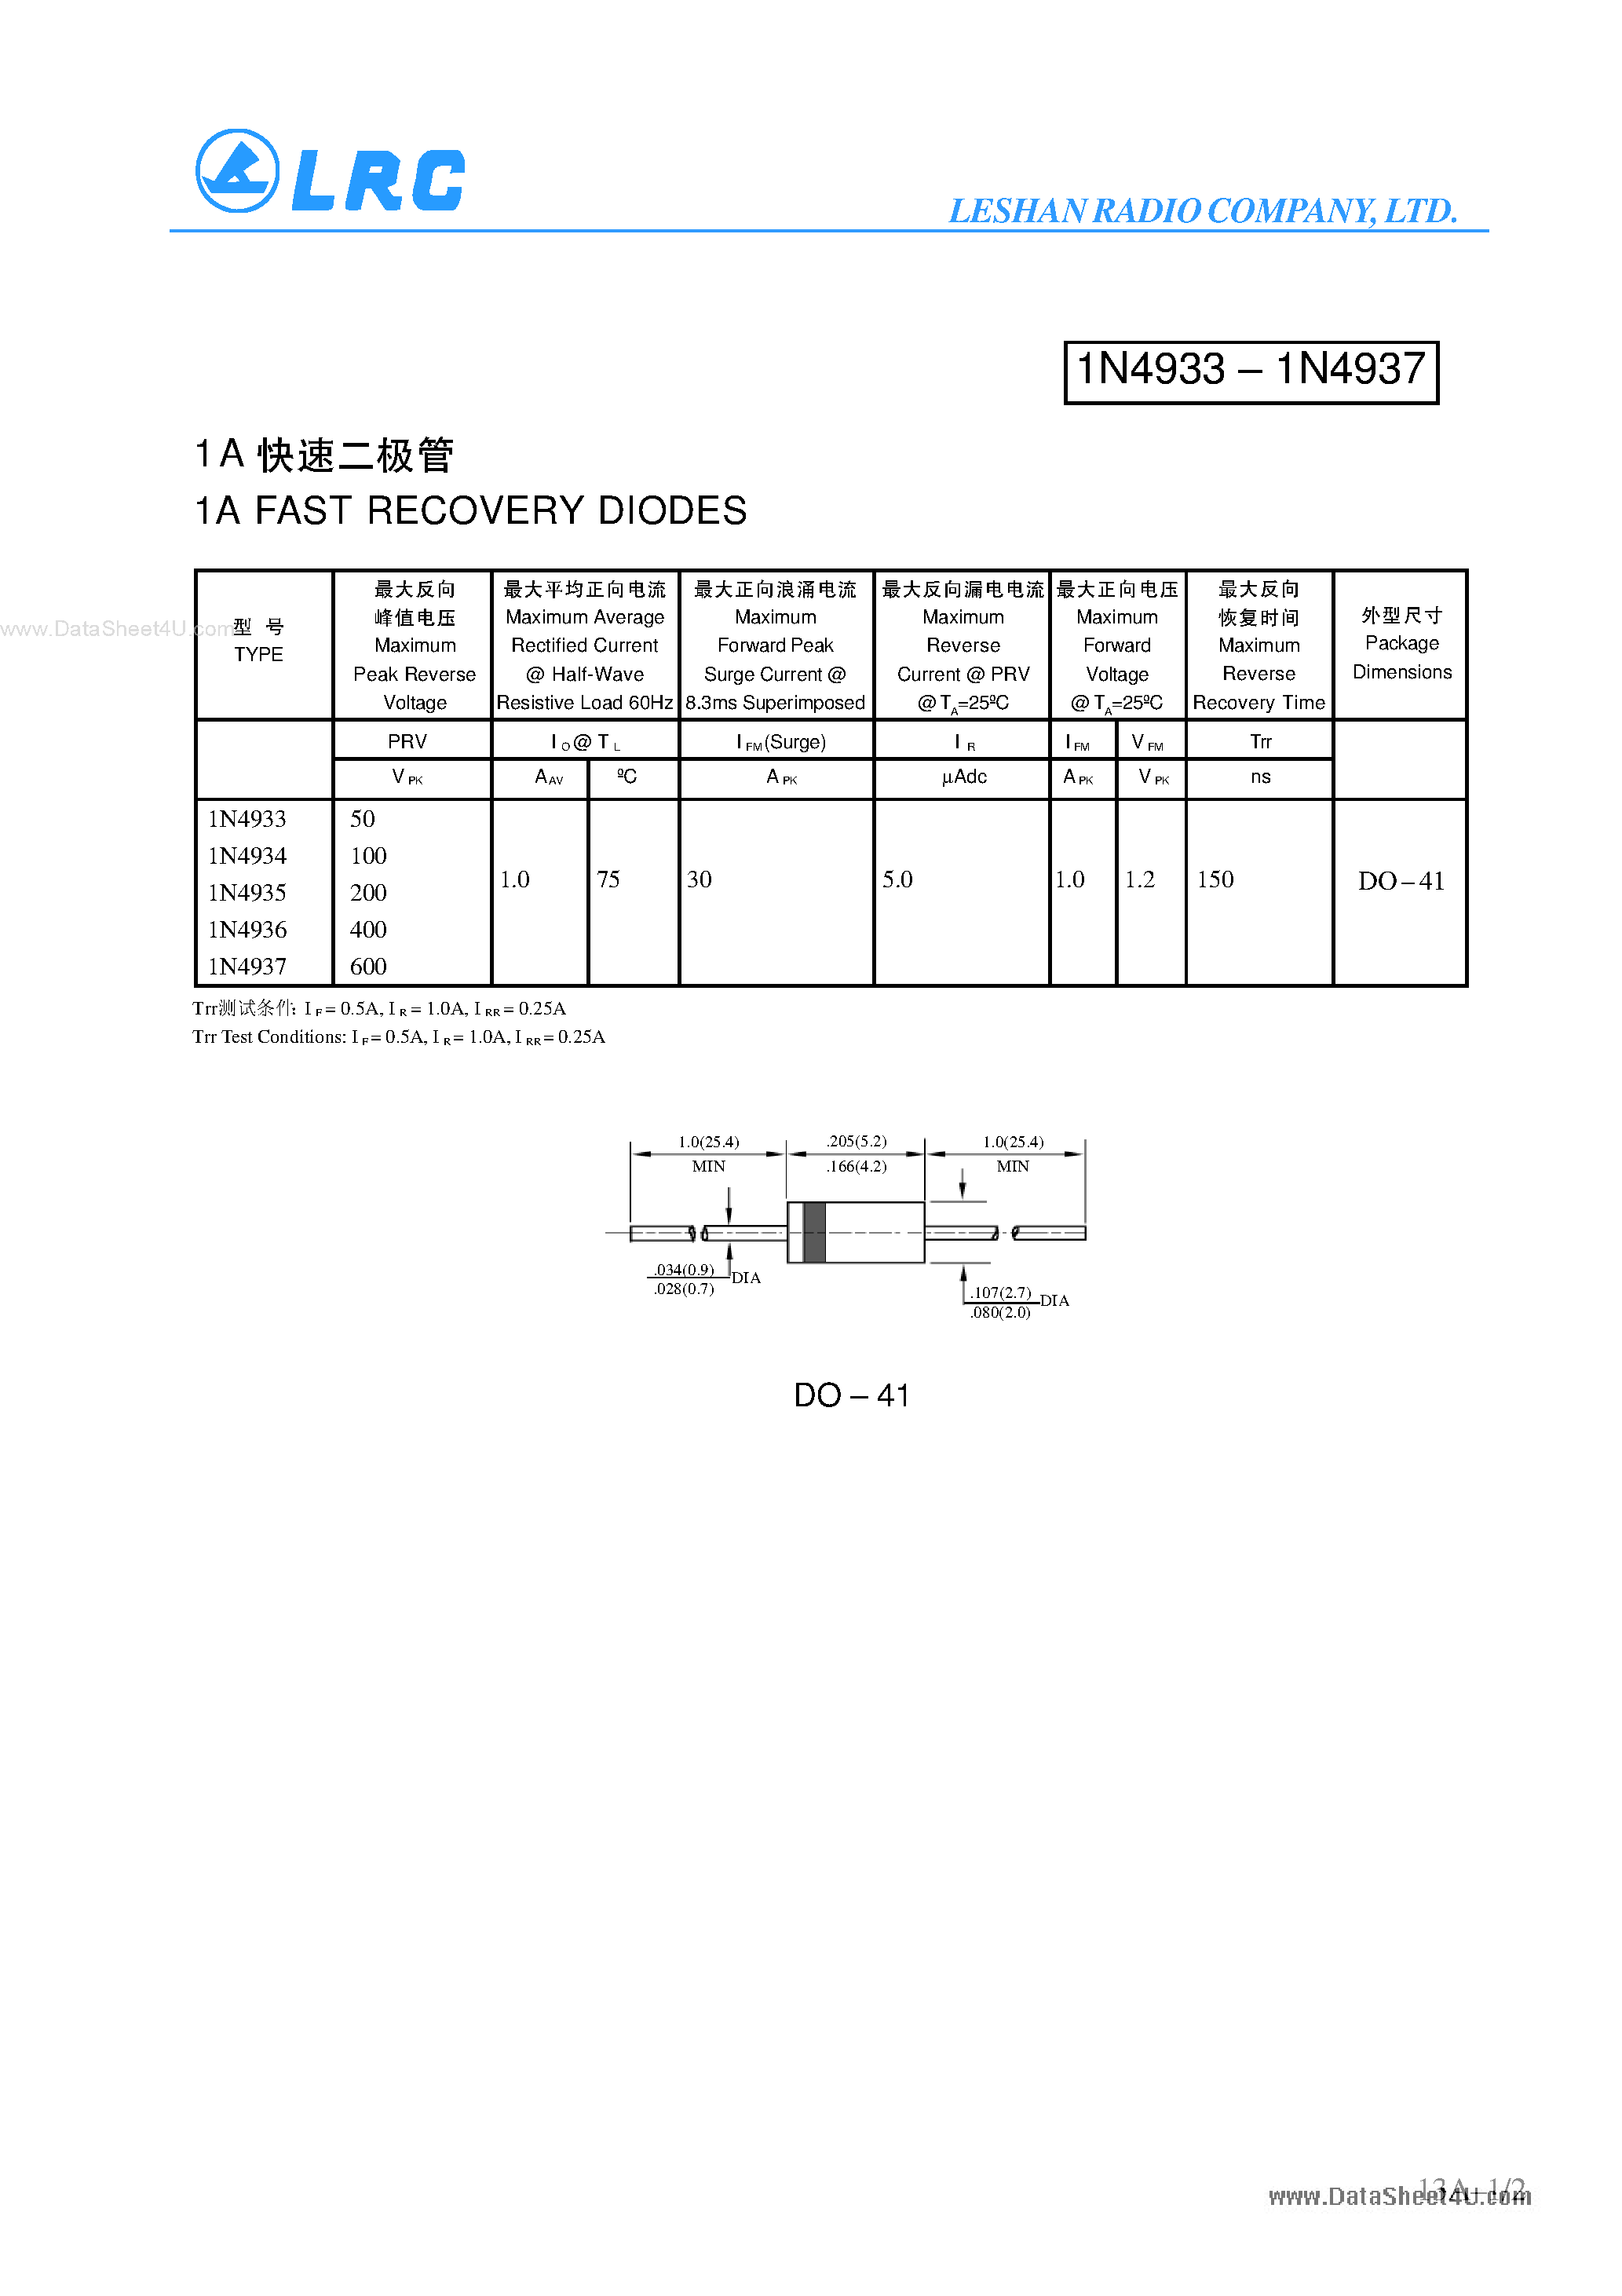 Datasheet IN4933 - (IN4933 - IN4937) 1A FAST RECOVERY DIODES page 1